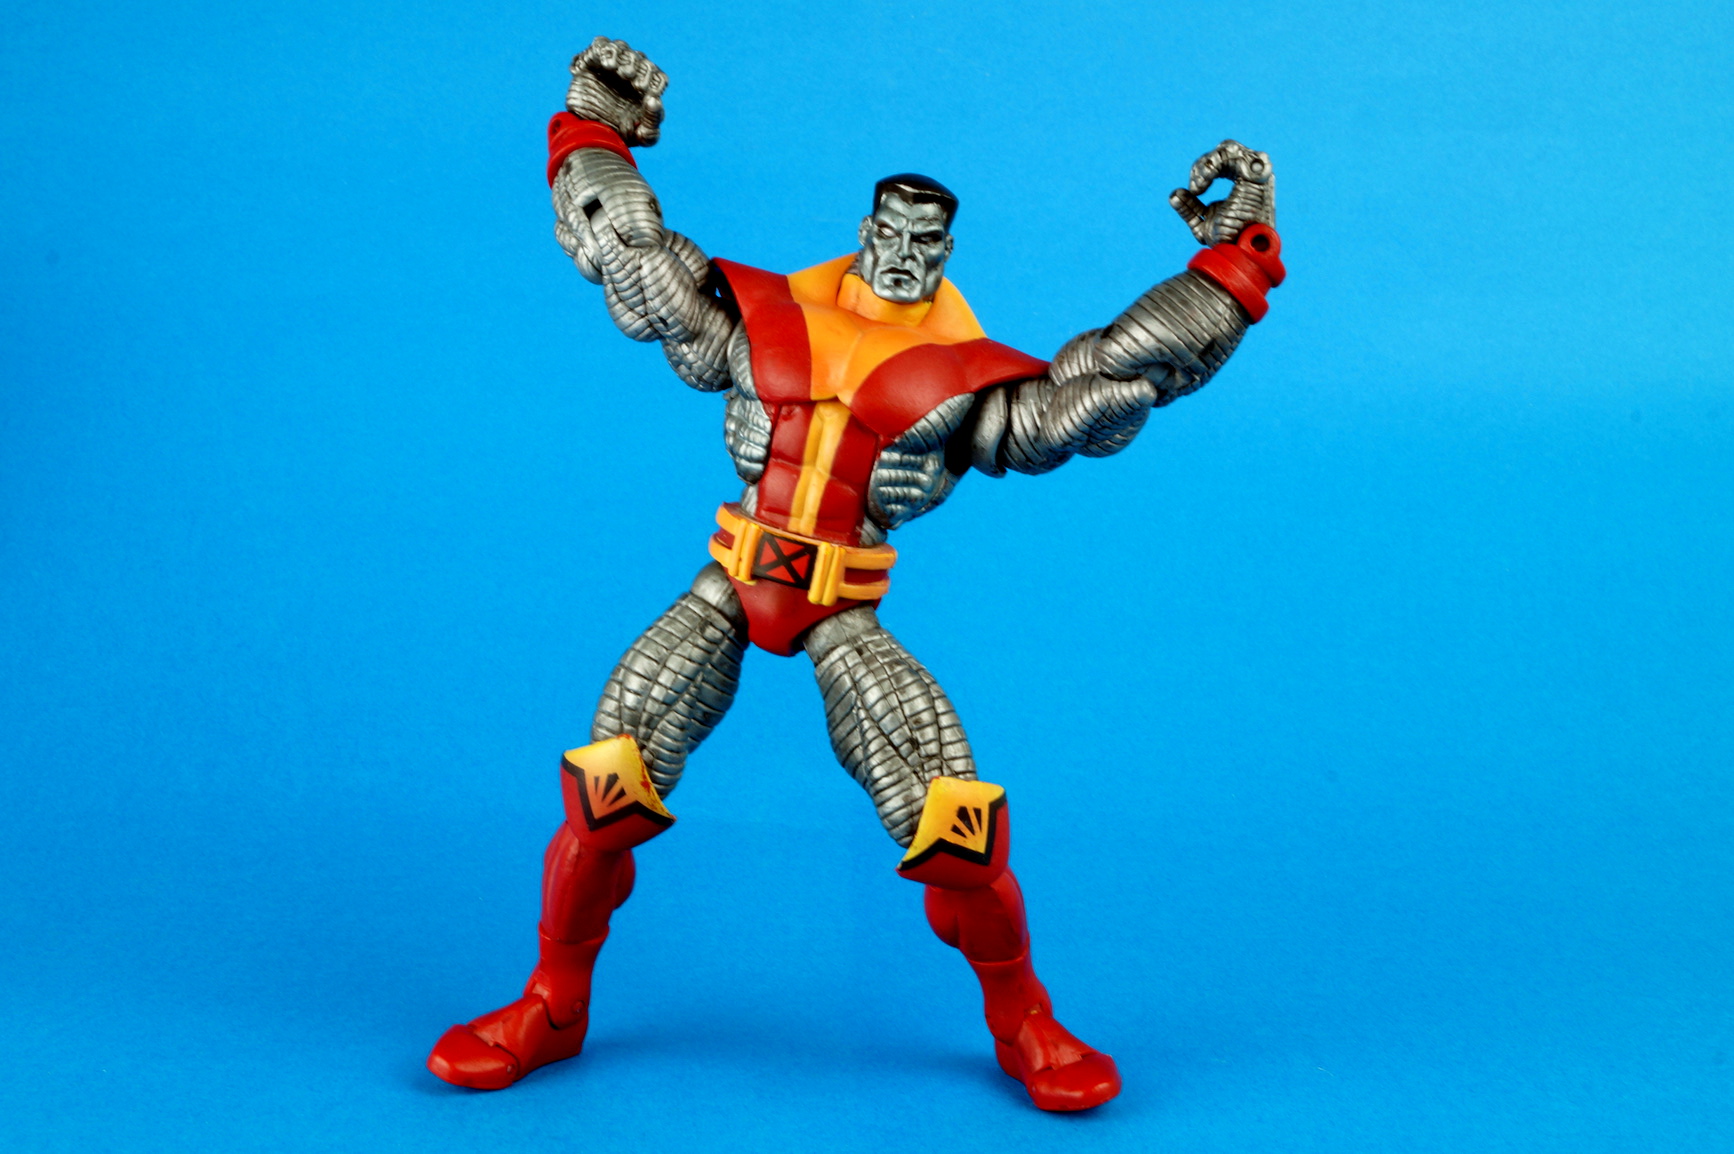 Details about   Marvel Legends Series 5 Colossus Sentinel Display Stand Base By ToyBiz 2004 